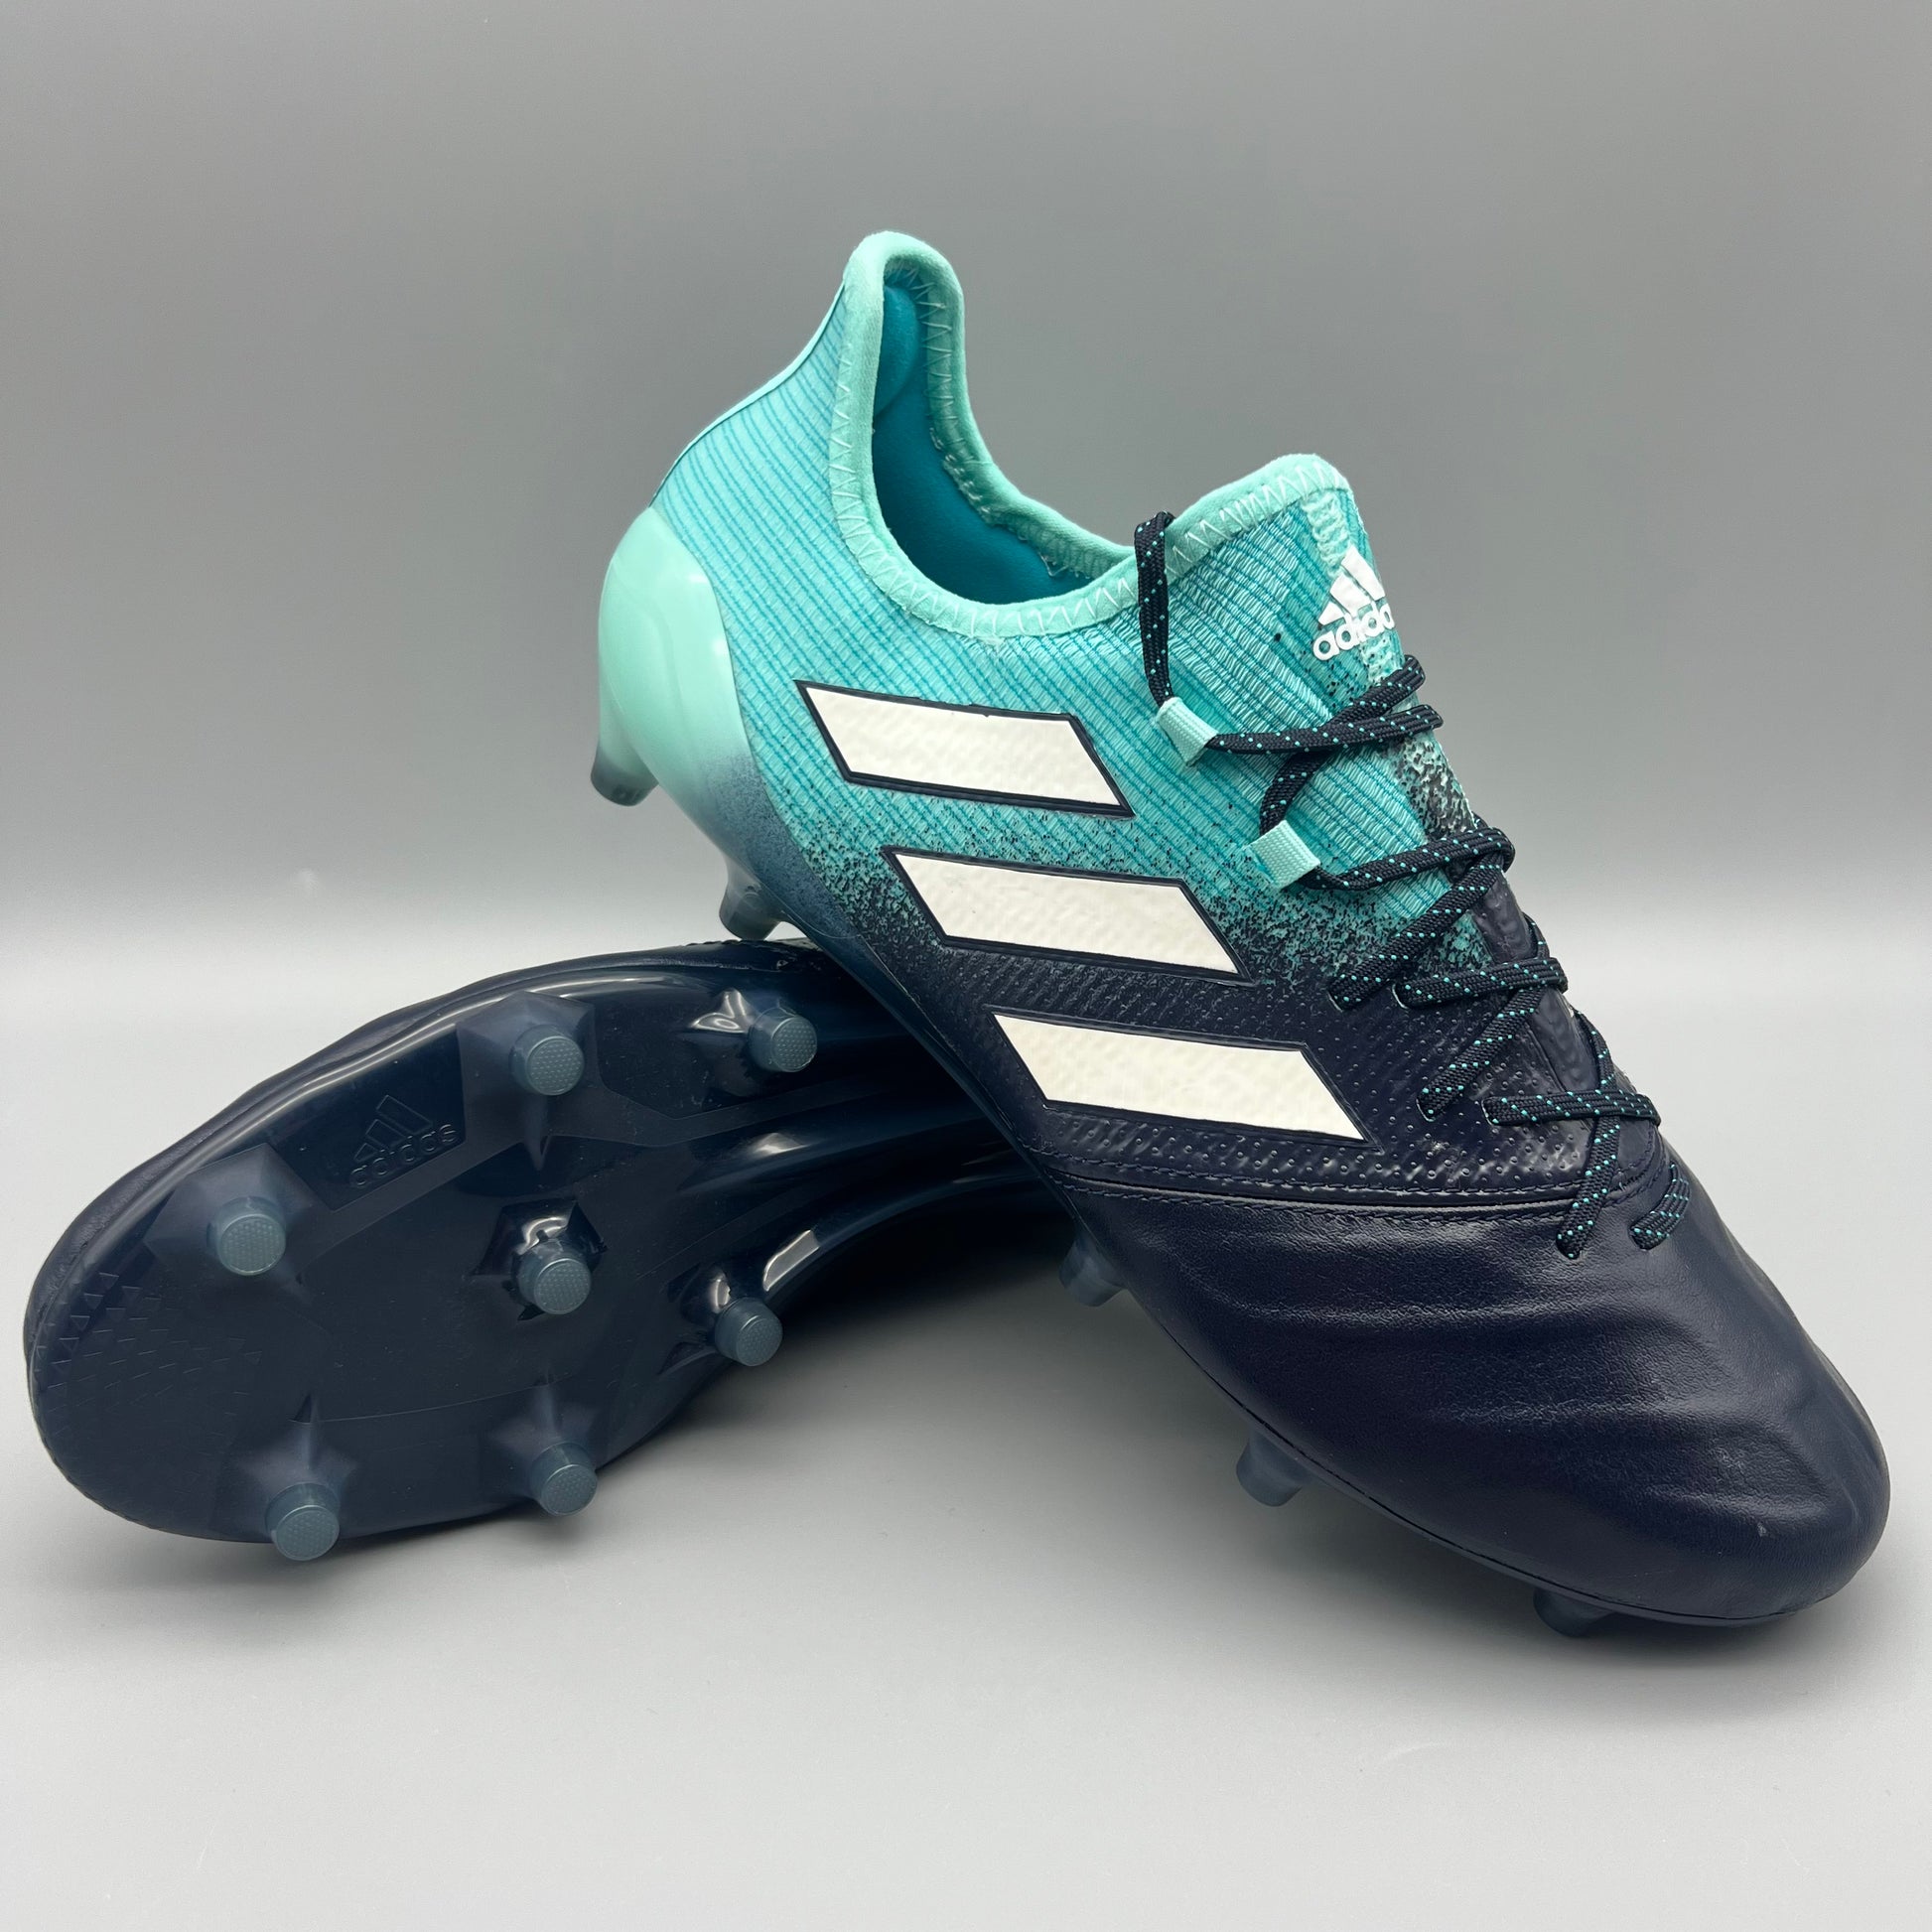 Adidas Ace 17.1 Leather 96boots